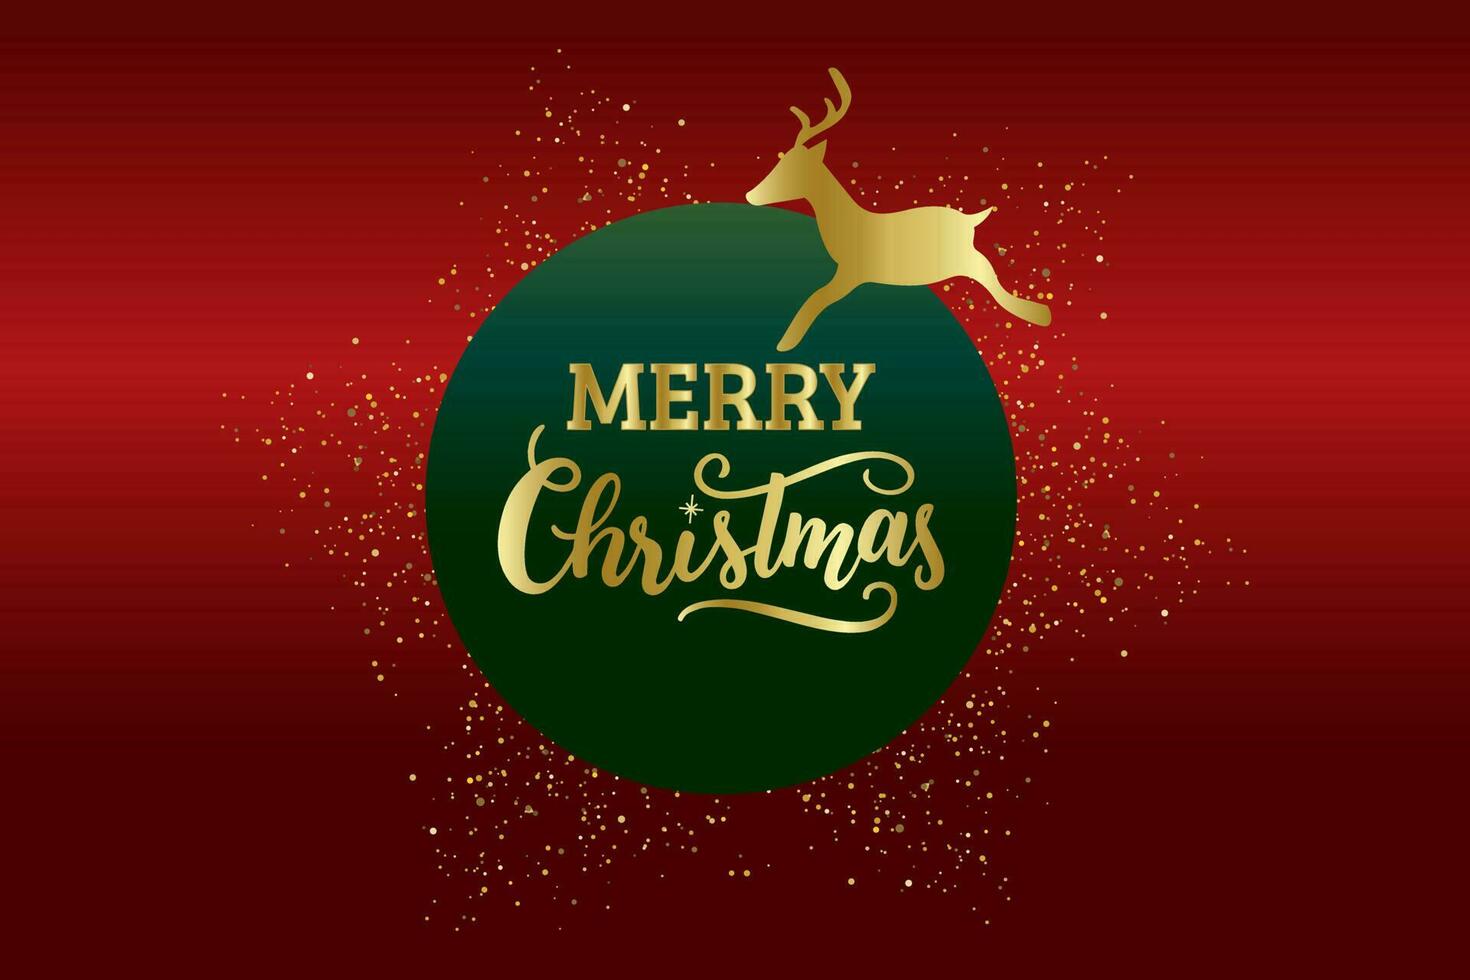 Merry Christmas Lettering Badge with Glittery Decorative Background Vector